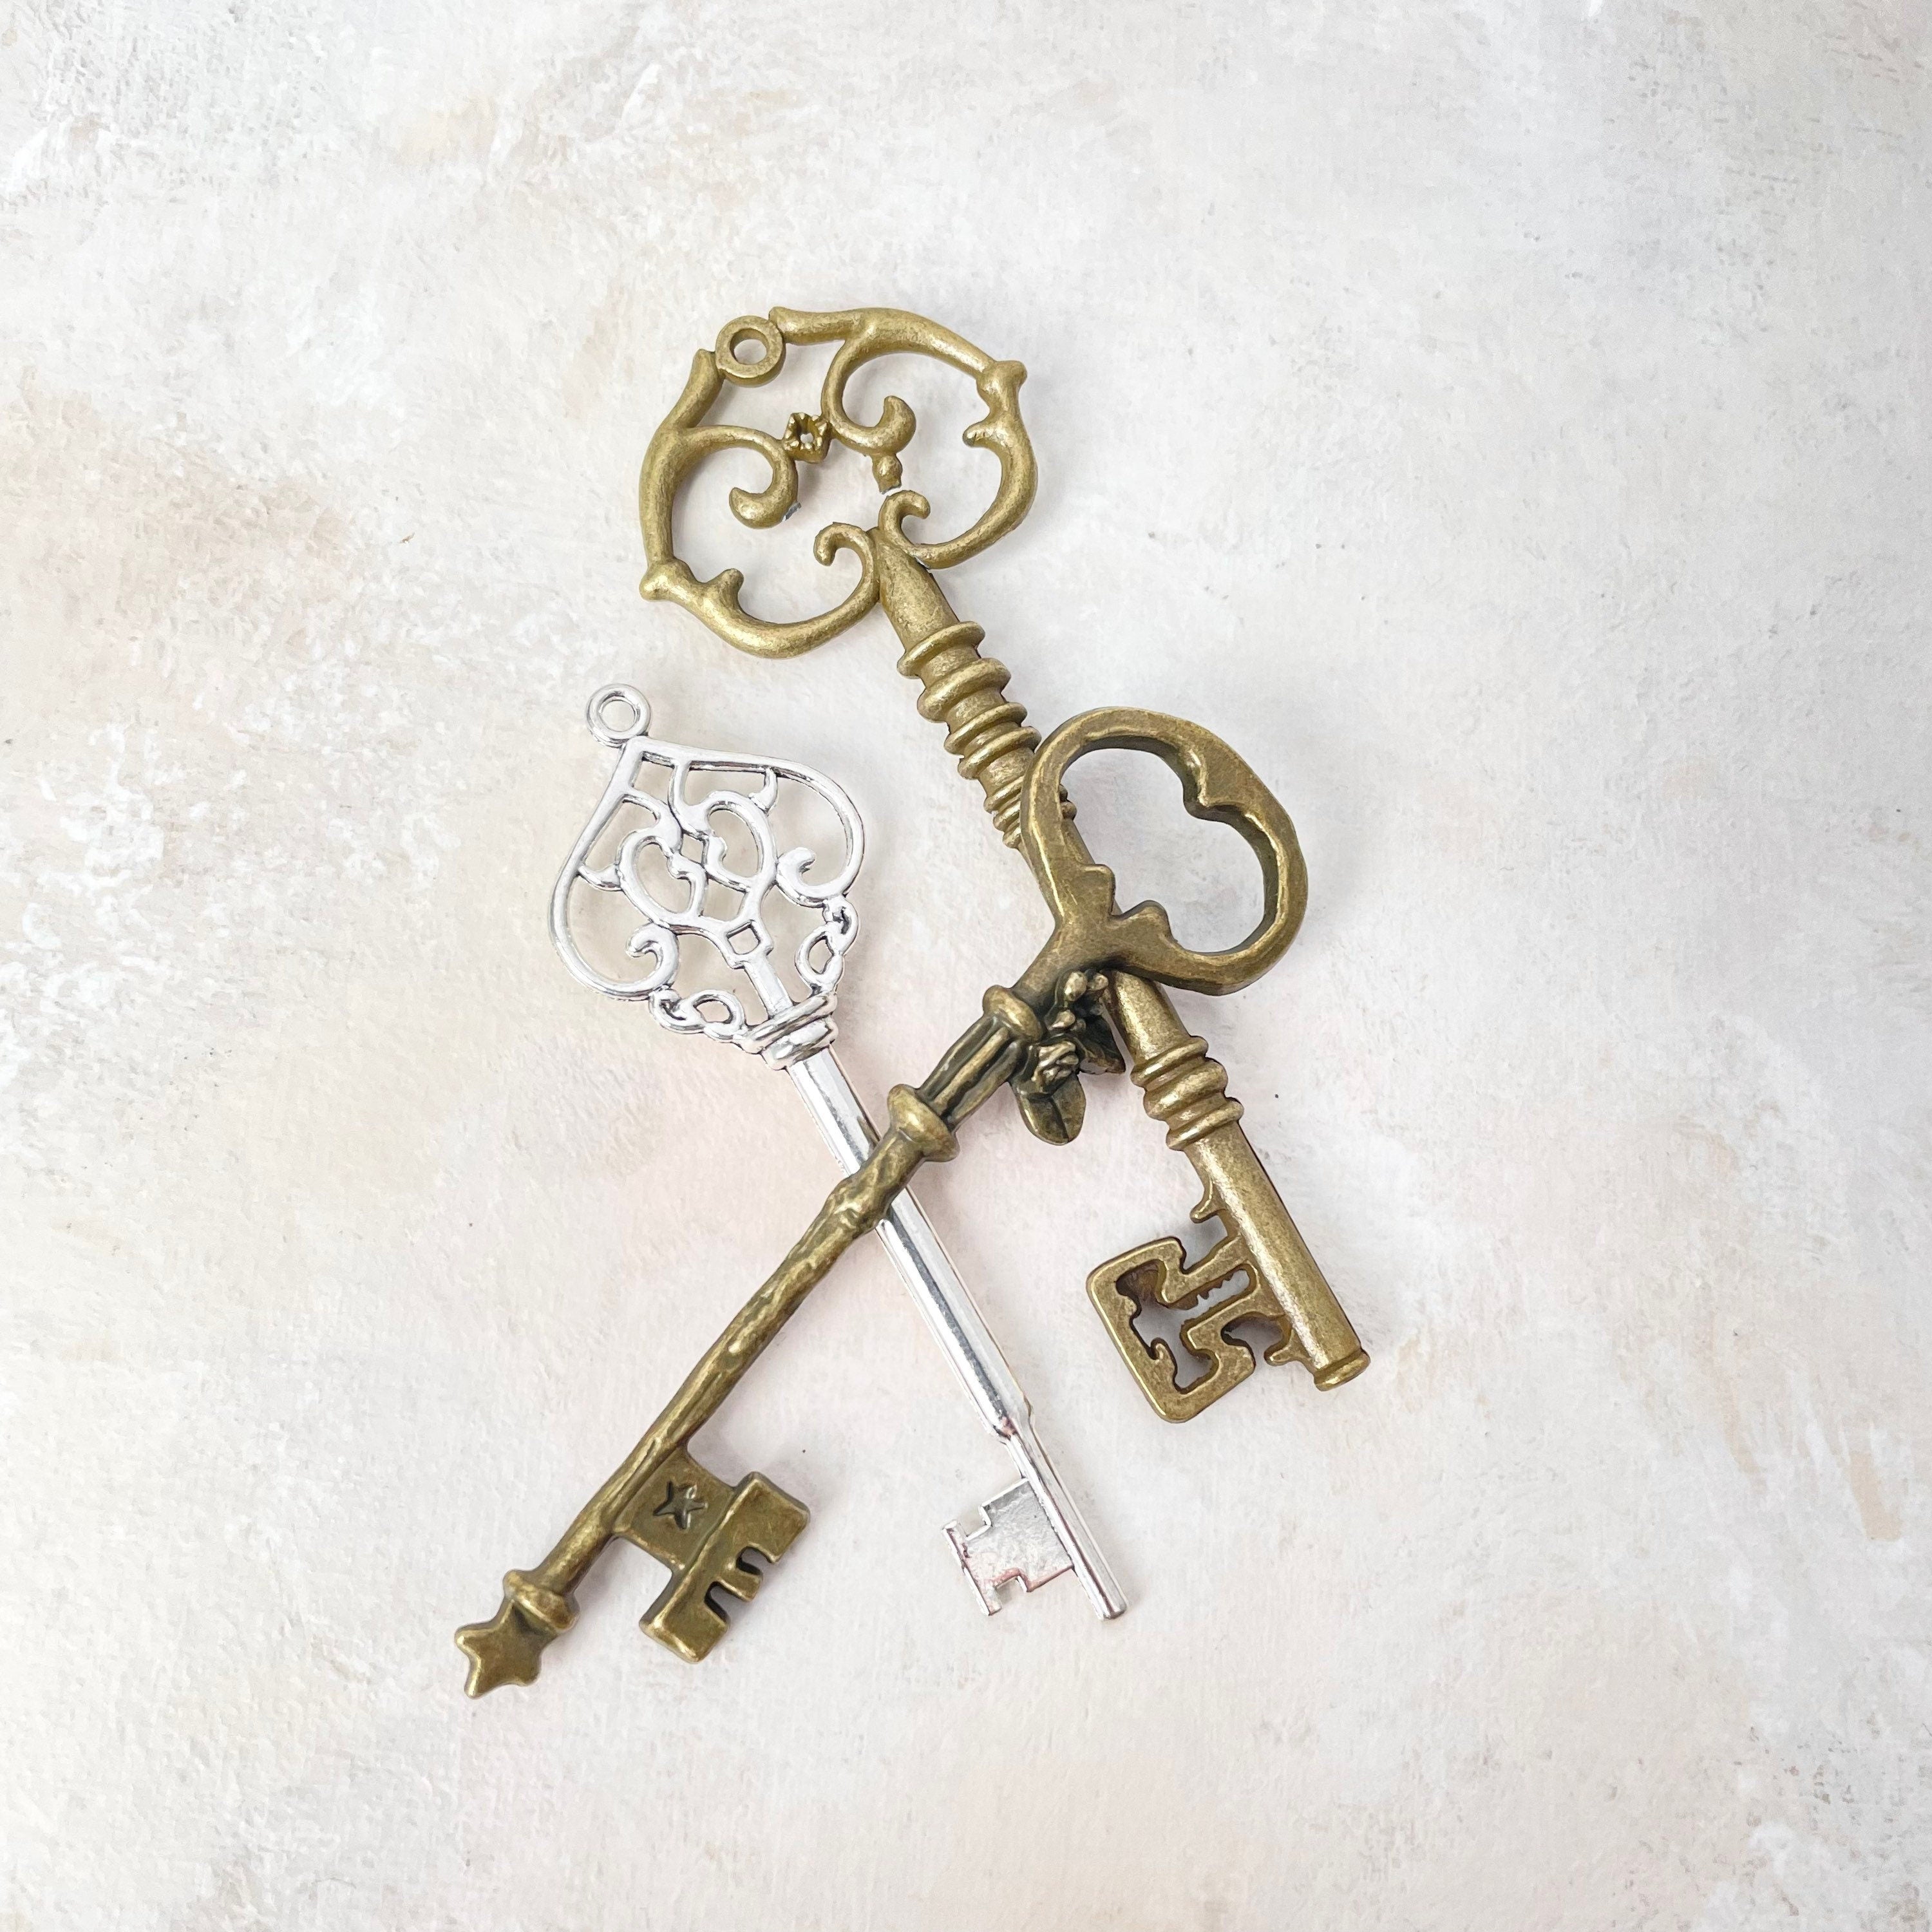 3 keys, gold, bronze and silver - must have Wedding Flat lay props from Champagne & GRIT